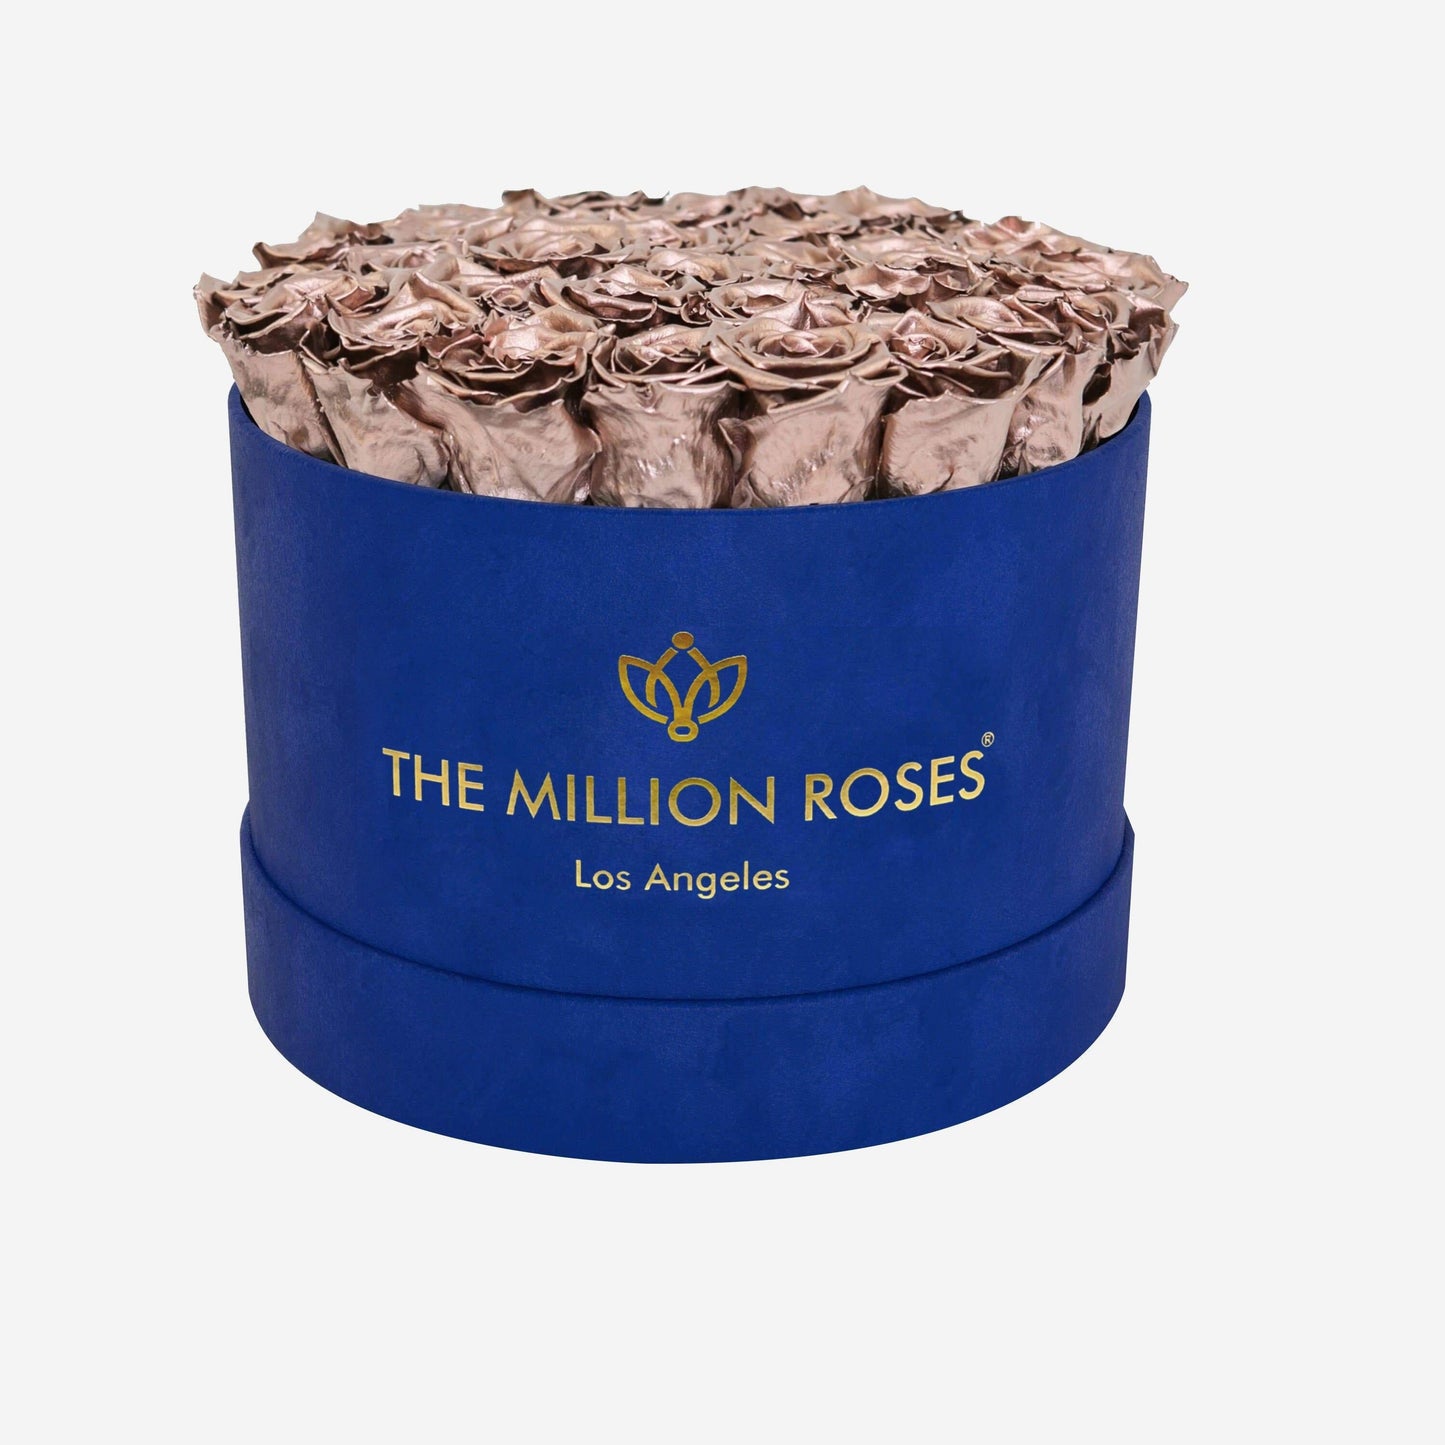 Supreme Royal Blue Suede Box | Rose Gold Roses - The Million Roses